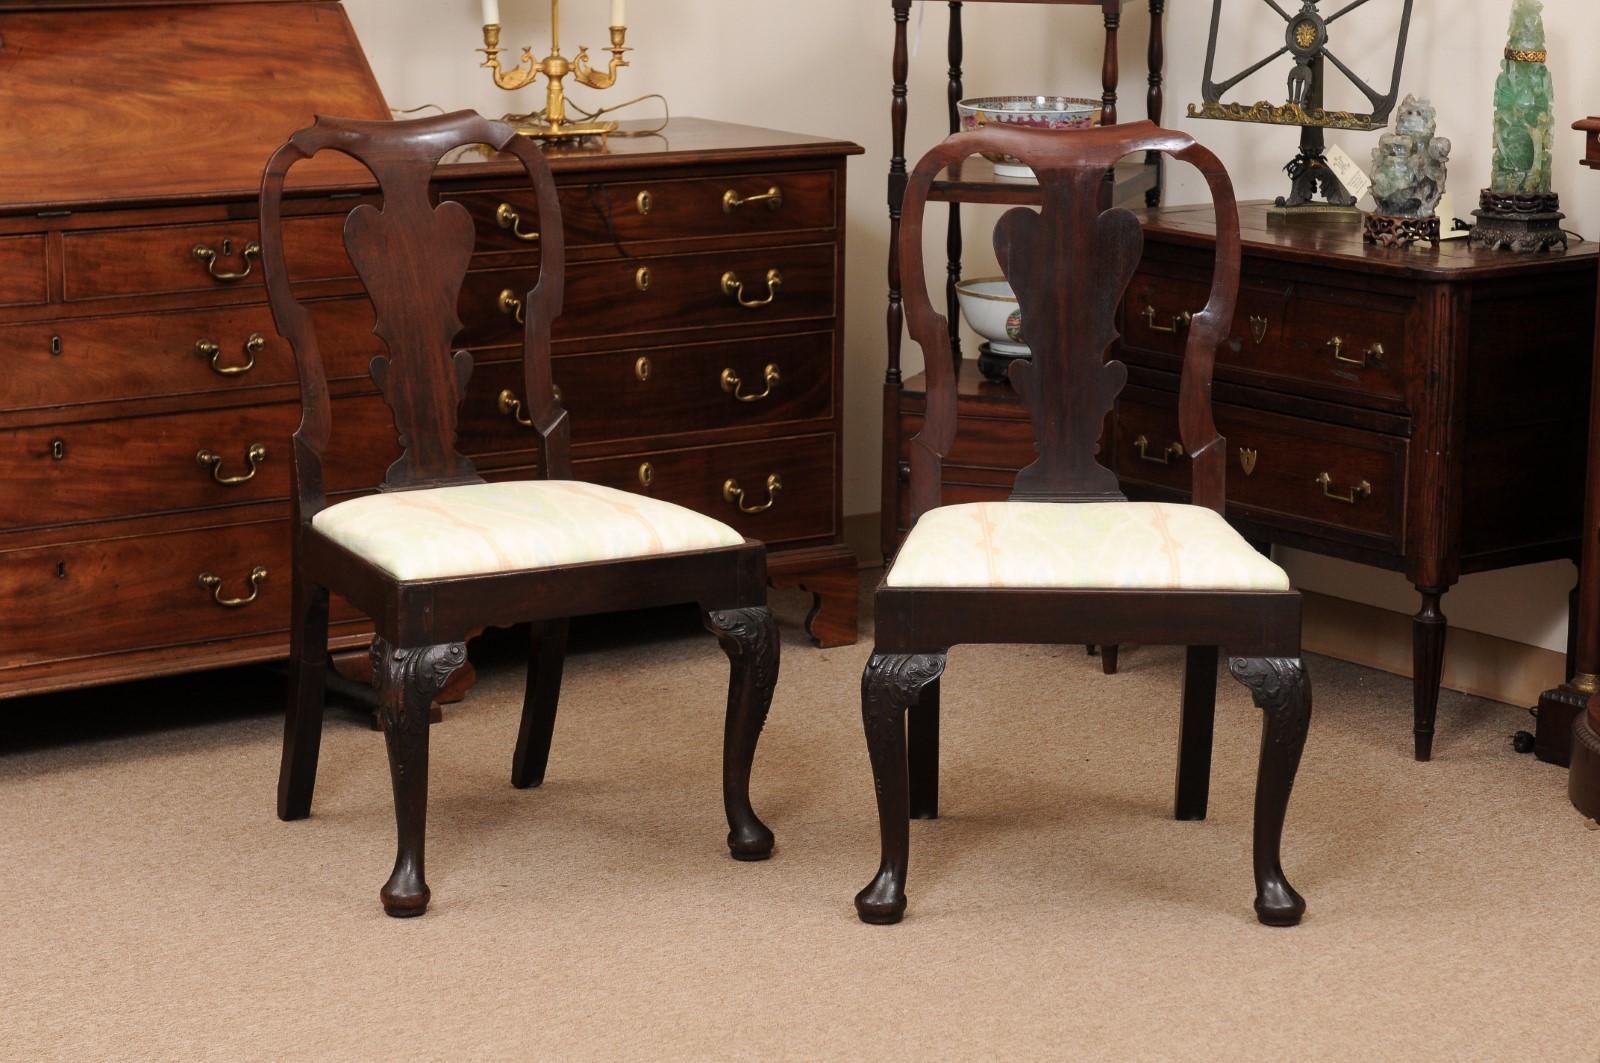 Pair of Queen Anne Walnut Side Chairs, 18th Century England In Good Condition For Sale In Atlanta, GA